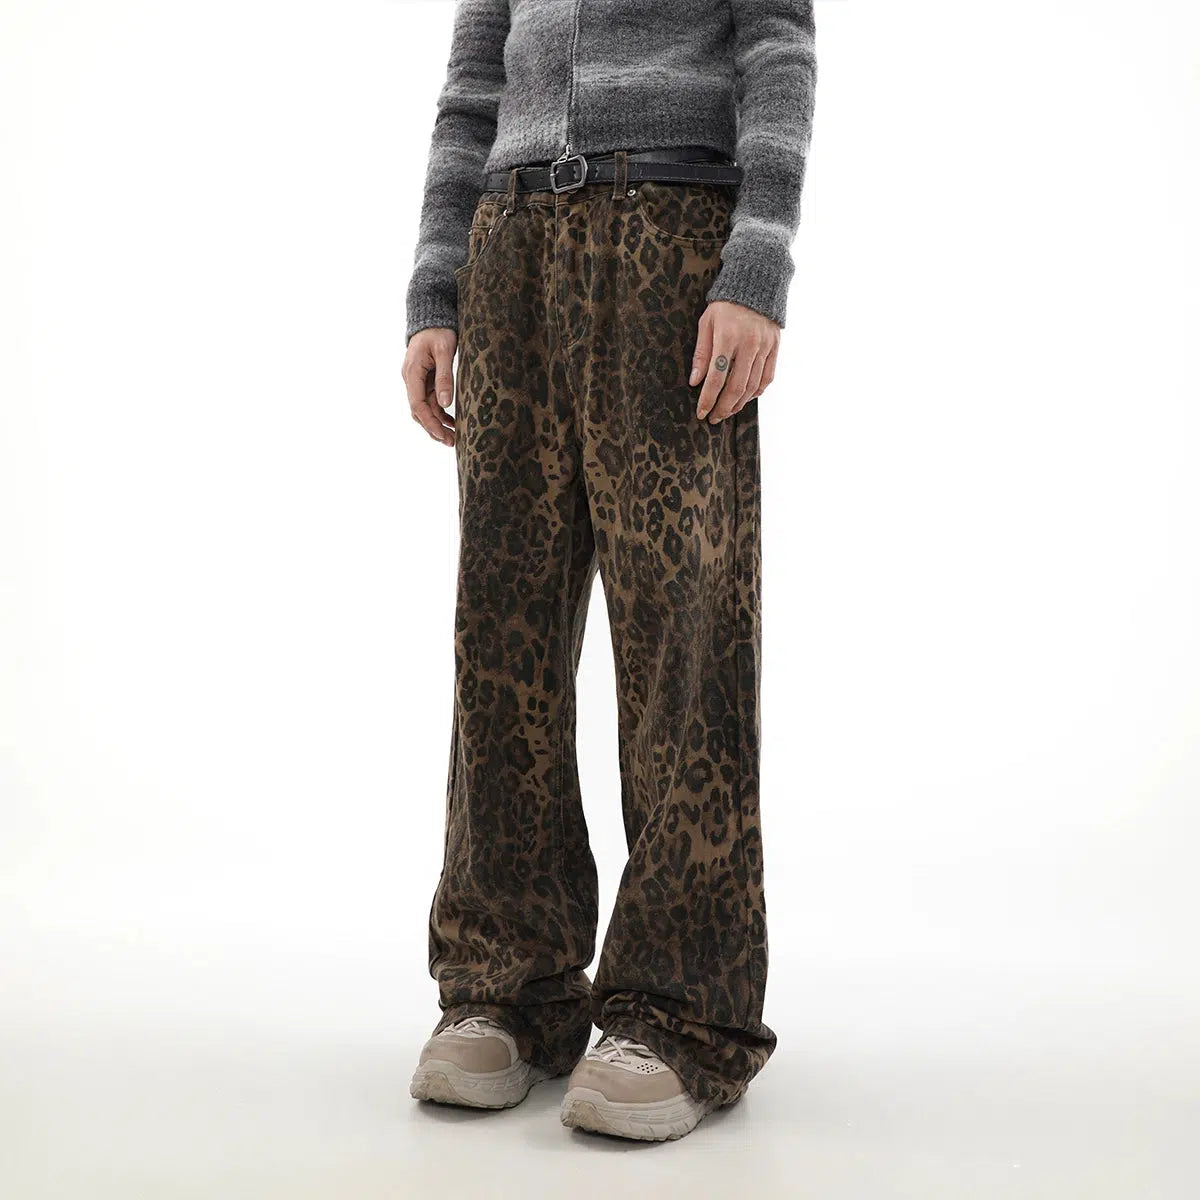 Leopard Print Straight Cut Jeans Korean Street Fashion Jeans By Mr Nearly Shop Online at OH Vault